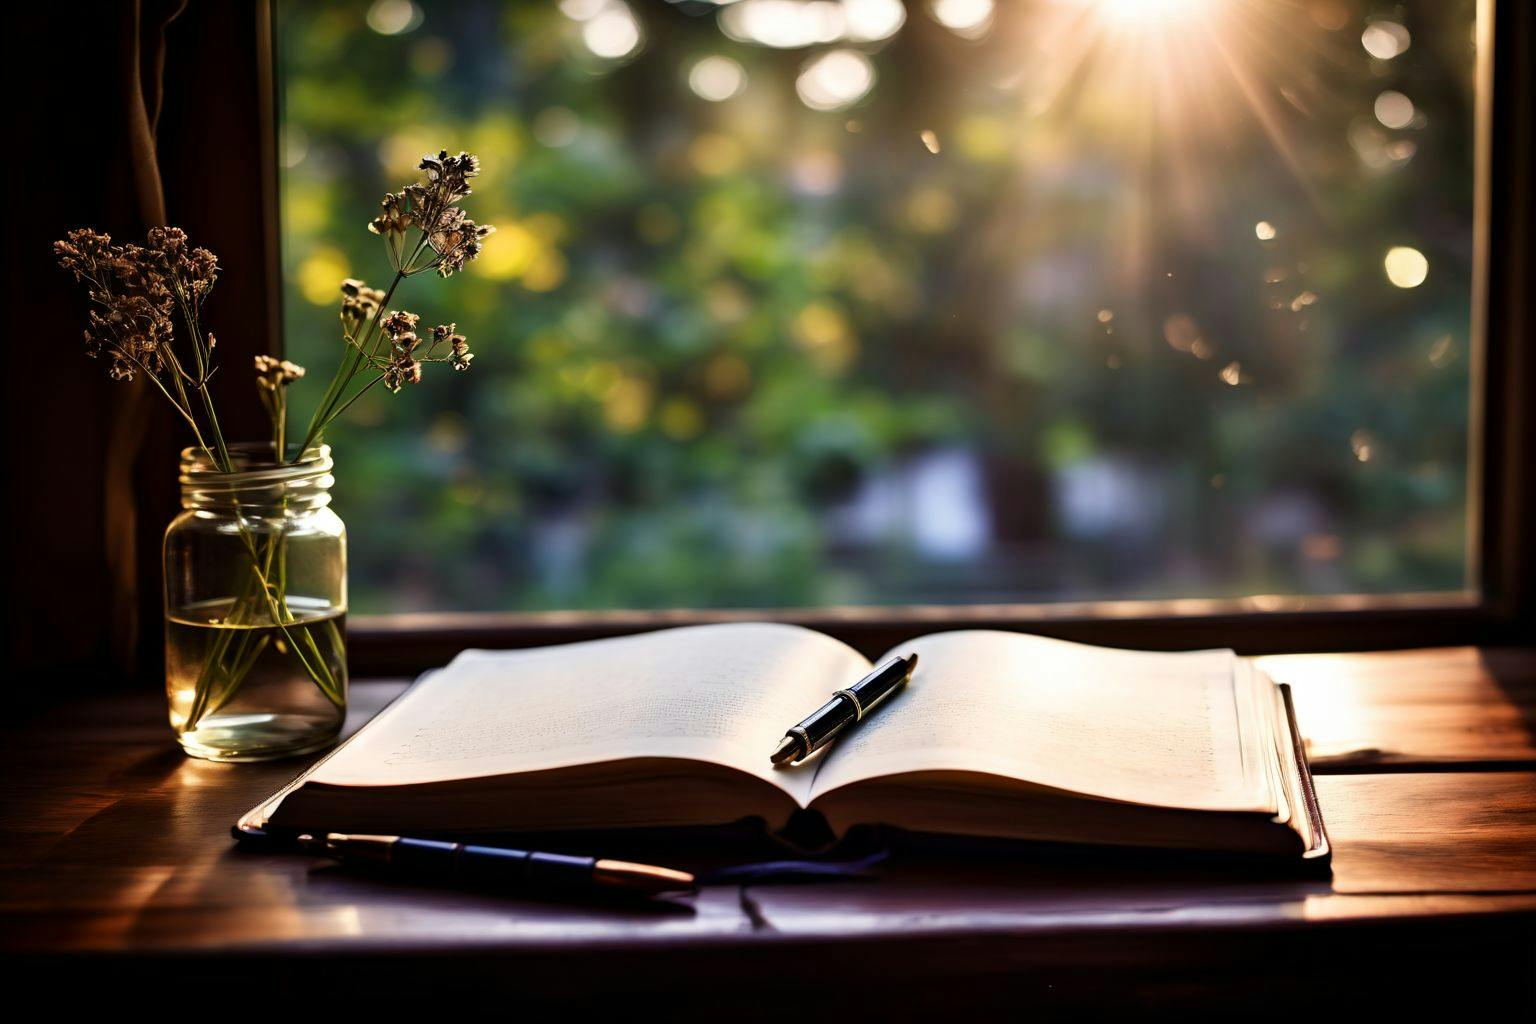 An open journal with a pen resting on it, on a wooden desk, beside a softly lit window, evoking a sense of intimacy and storytelling, Photographic, with a shallow depth of field.